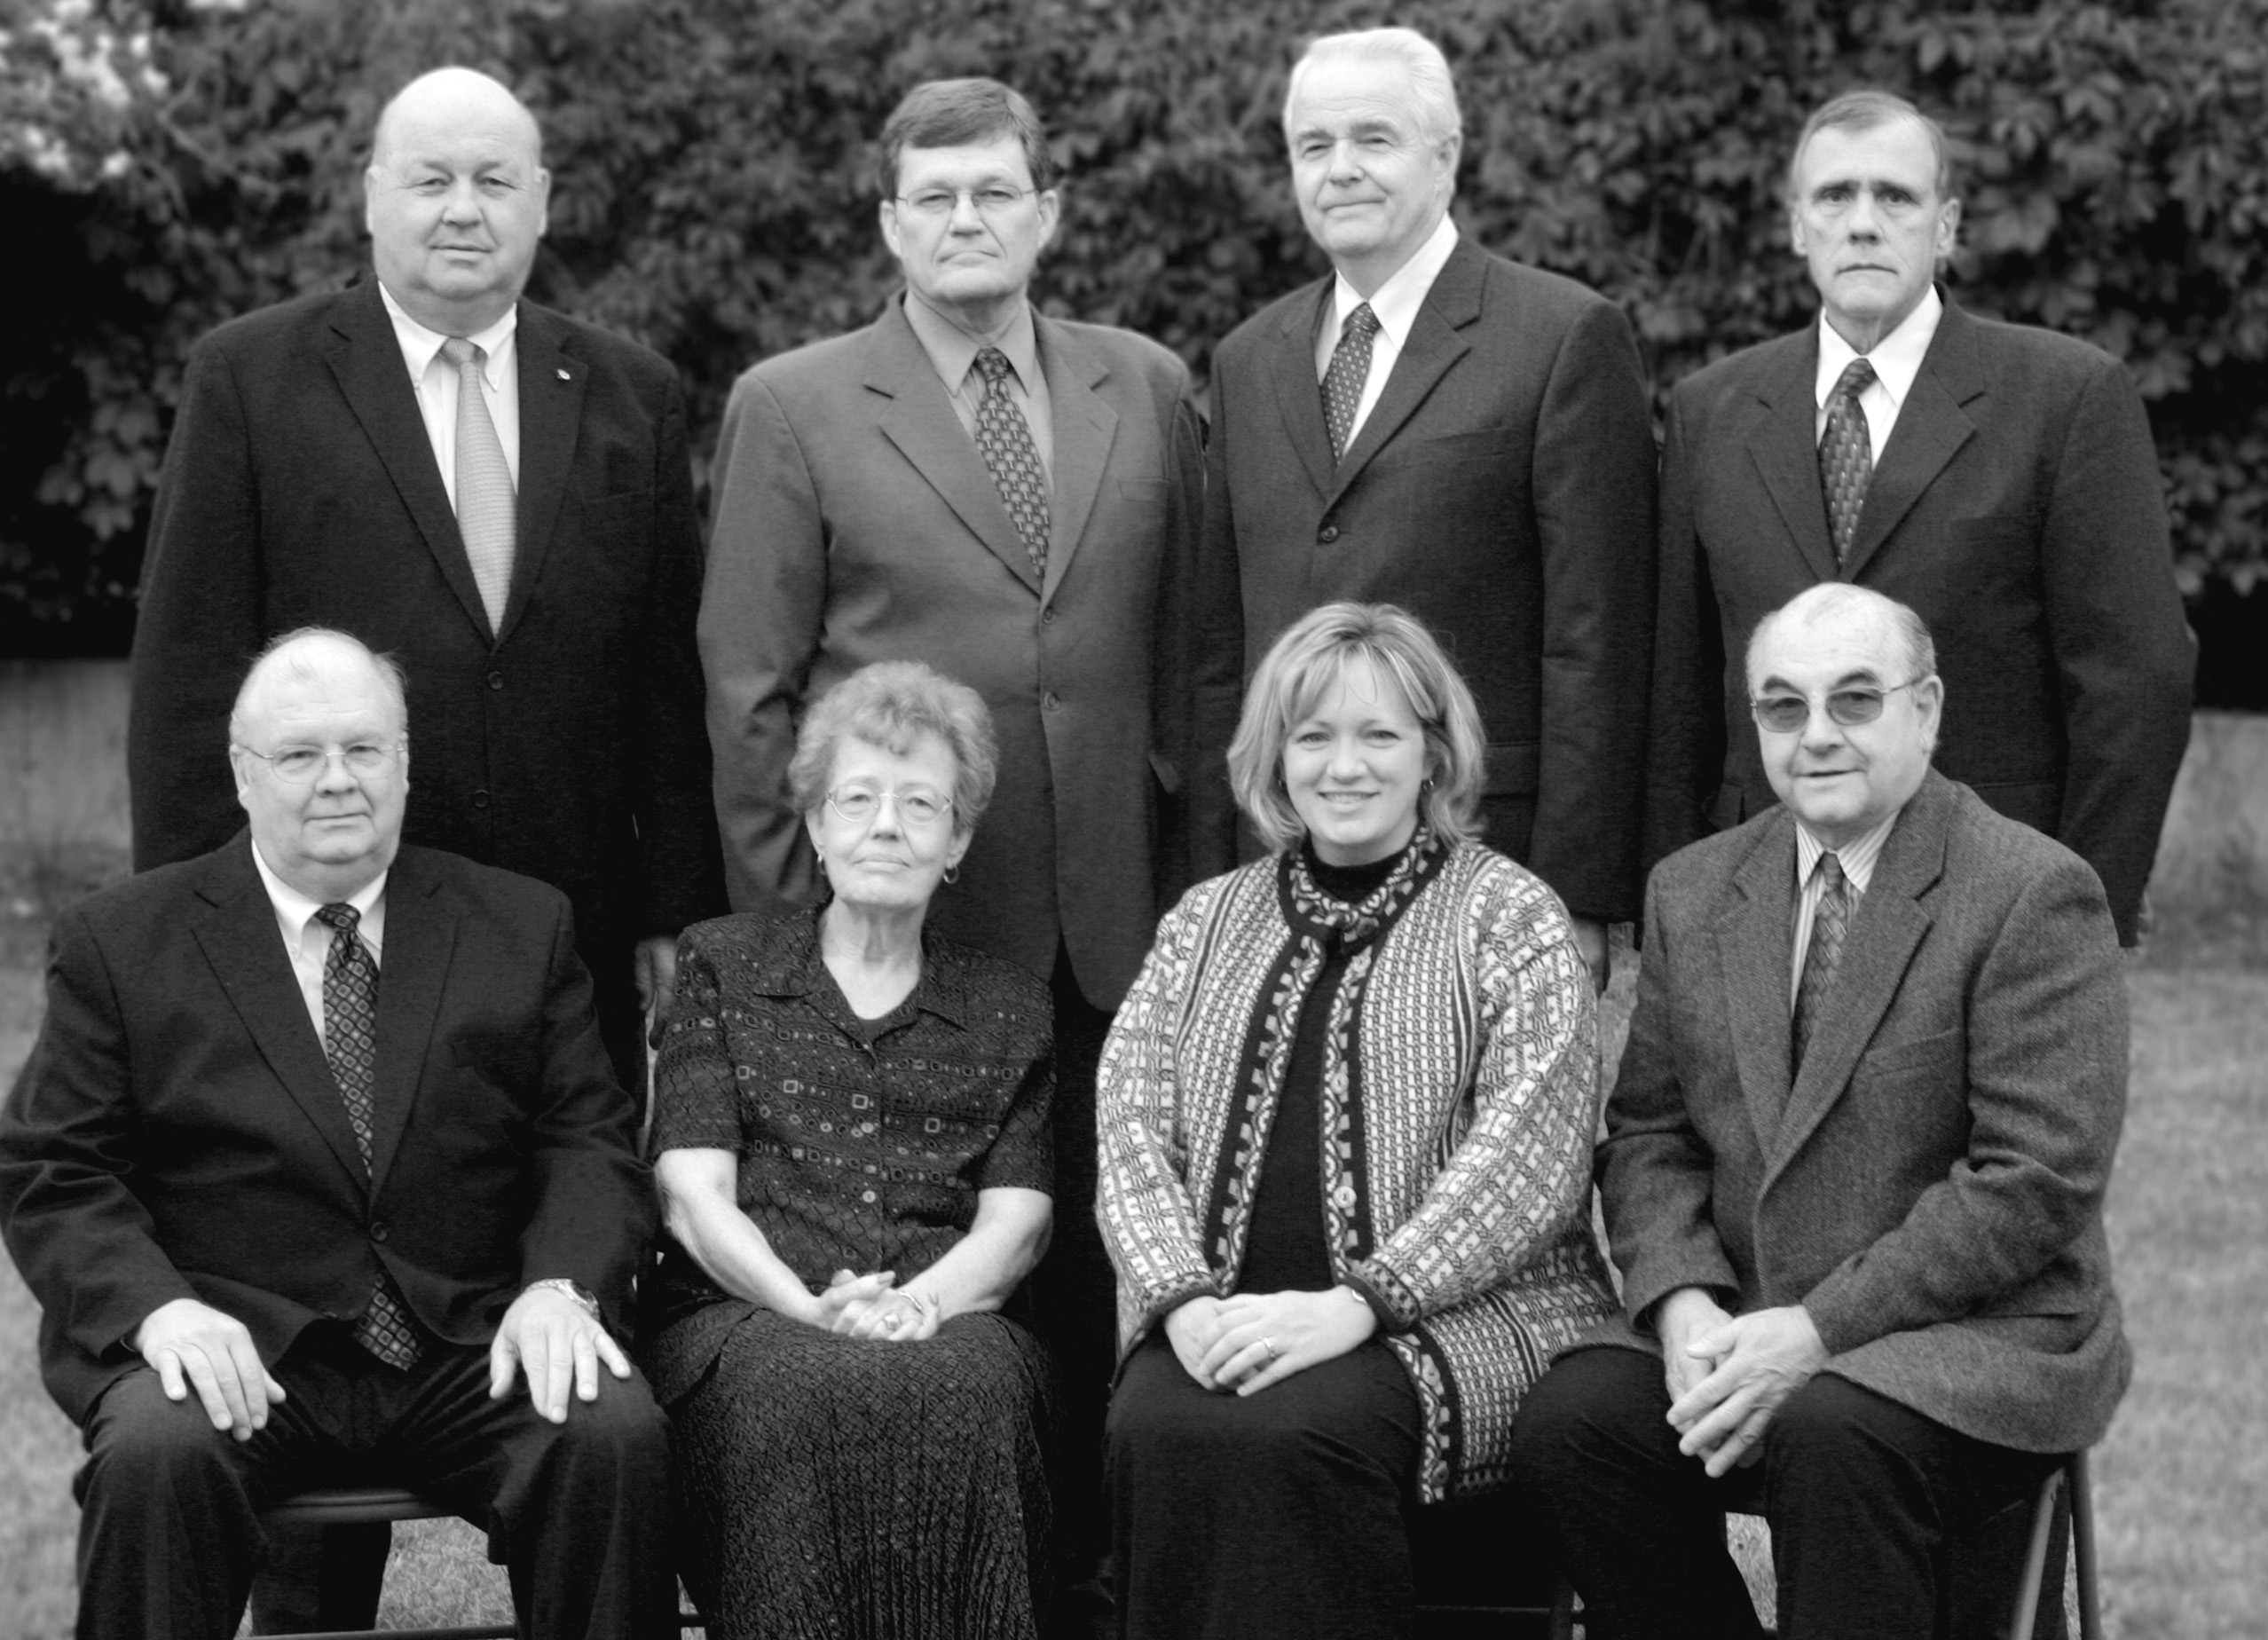 Members of the Sesquicentennial Celebration Committee